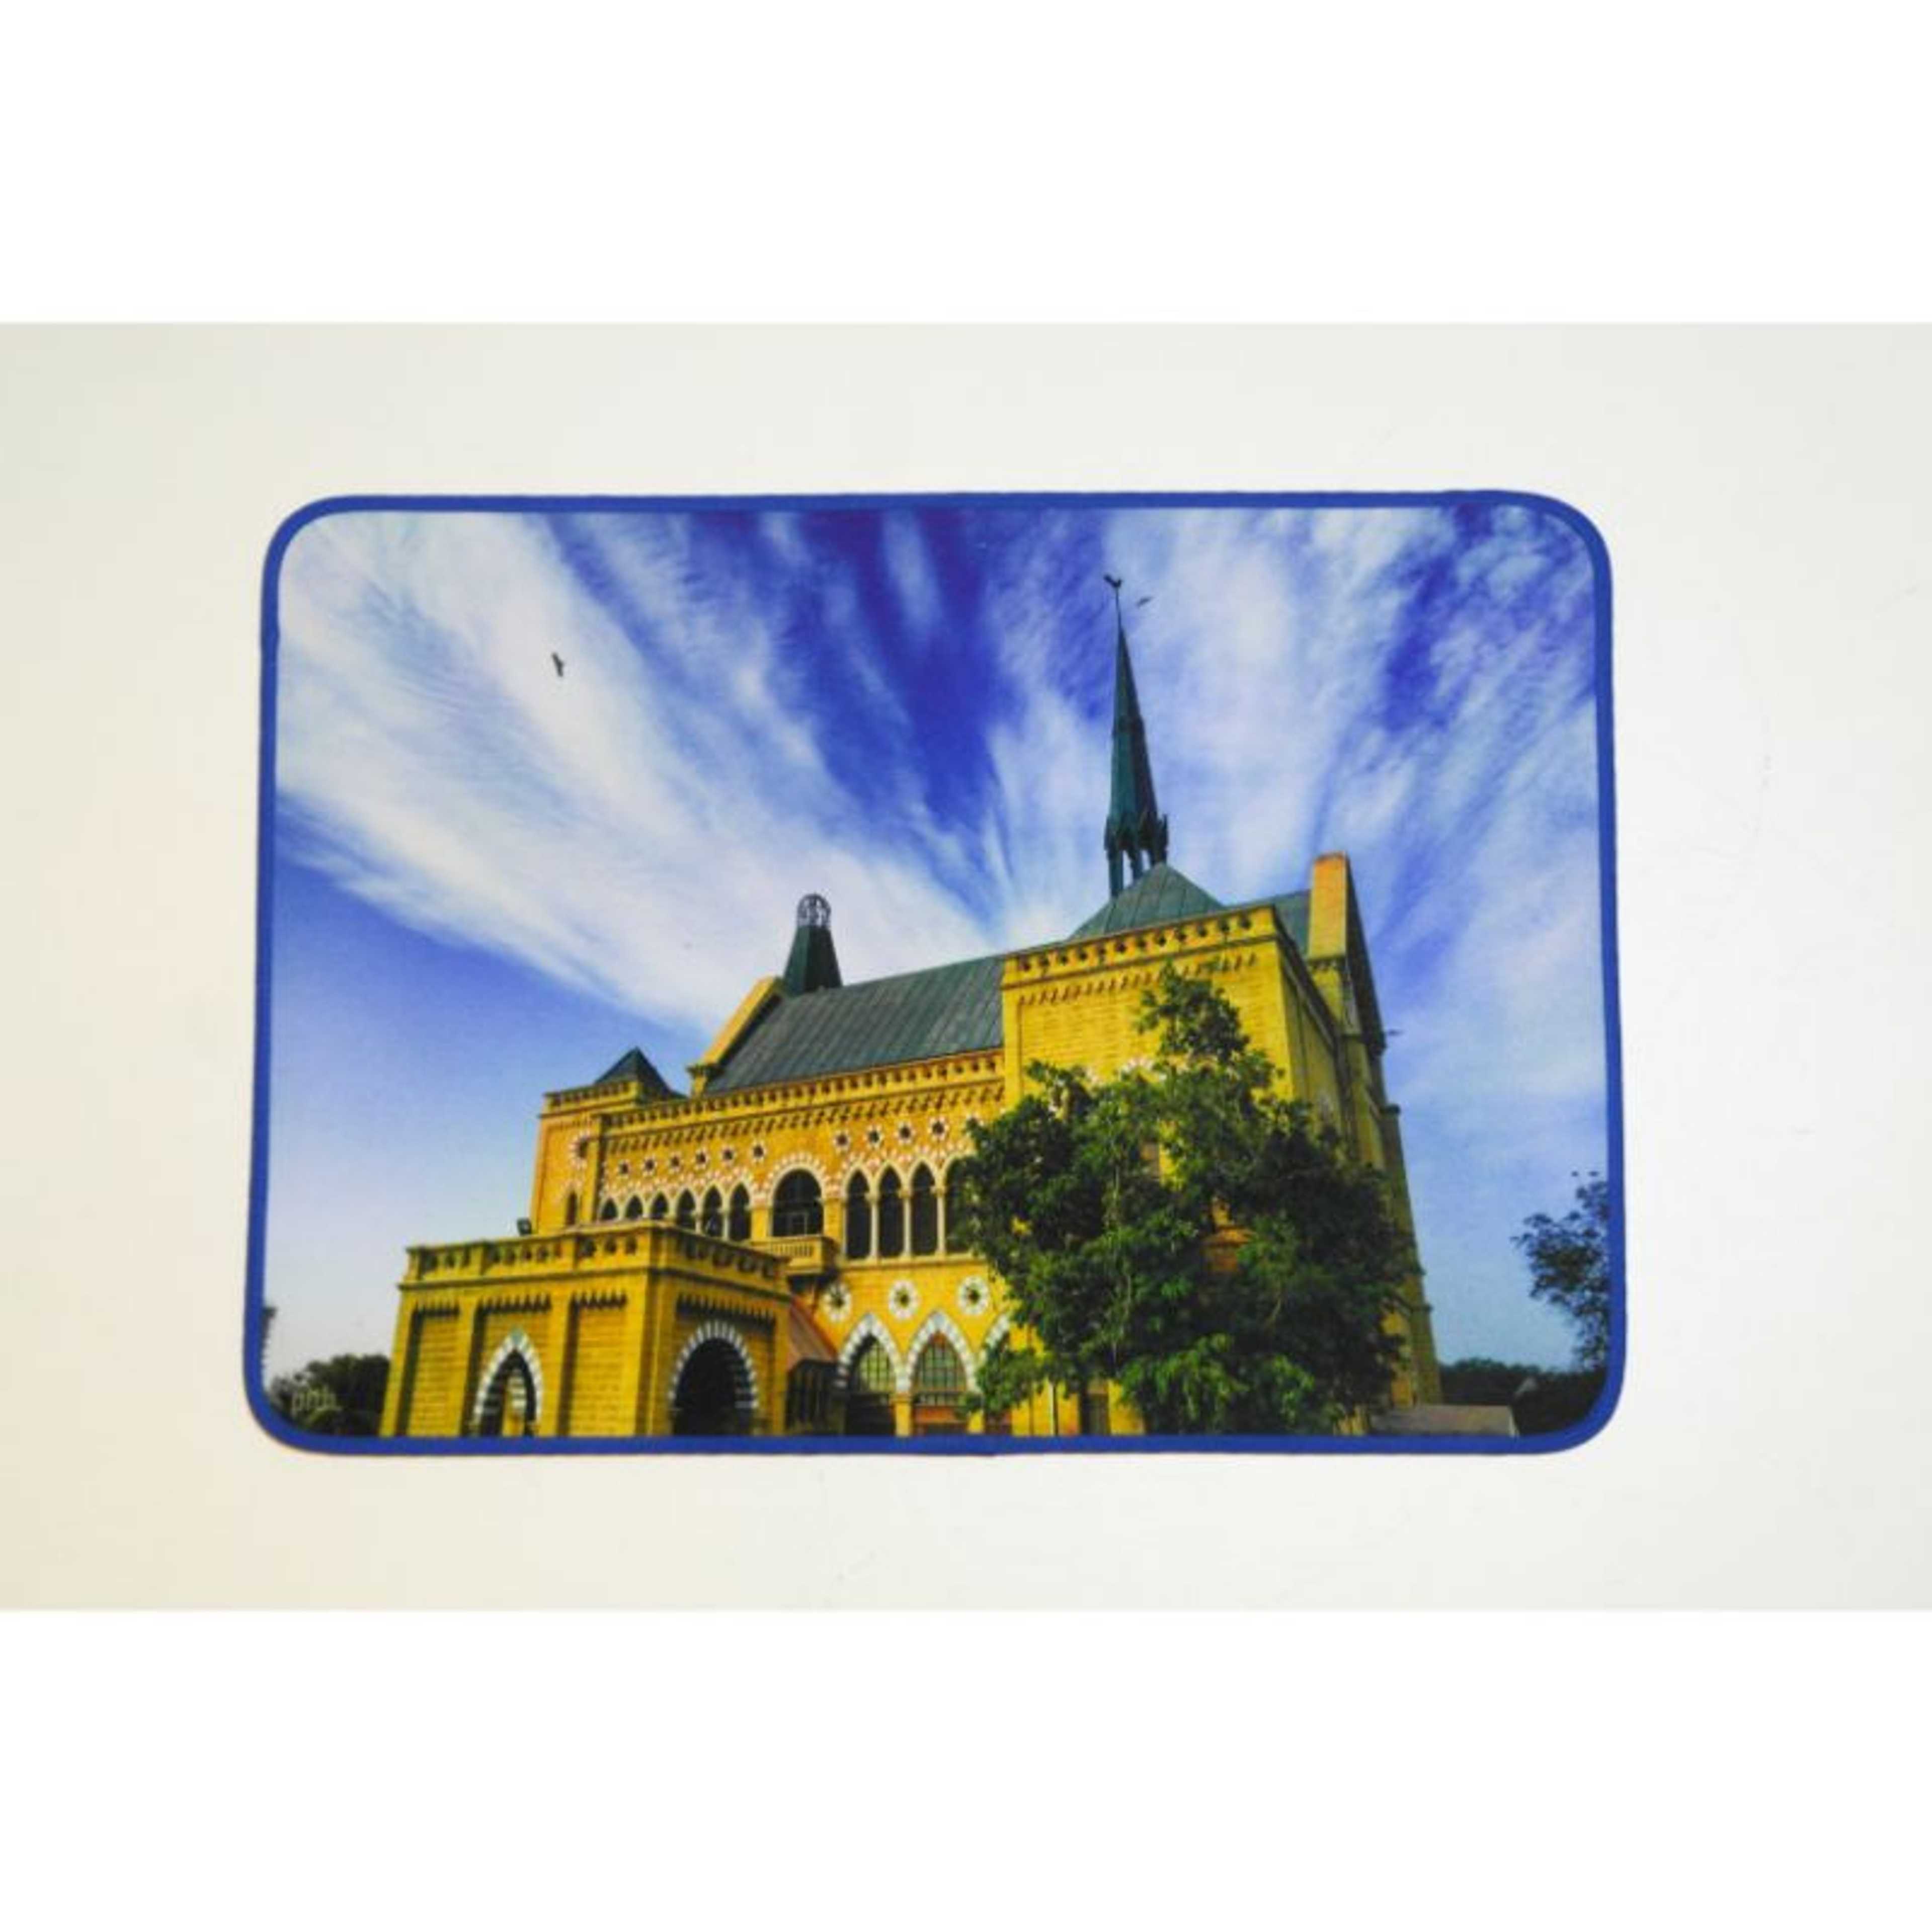 FRERE HALL - TABLE MAT